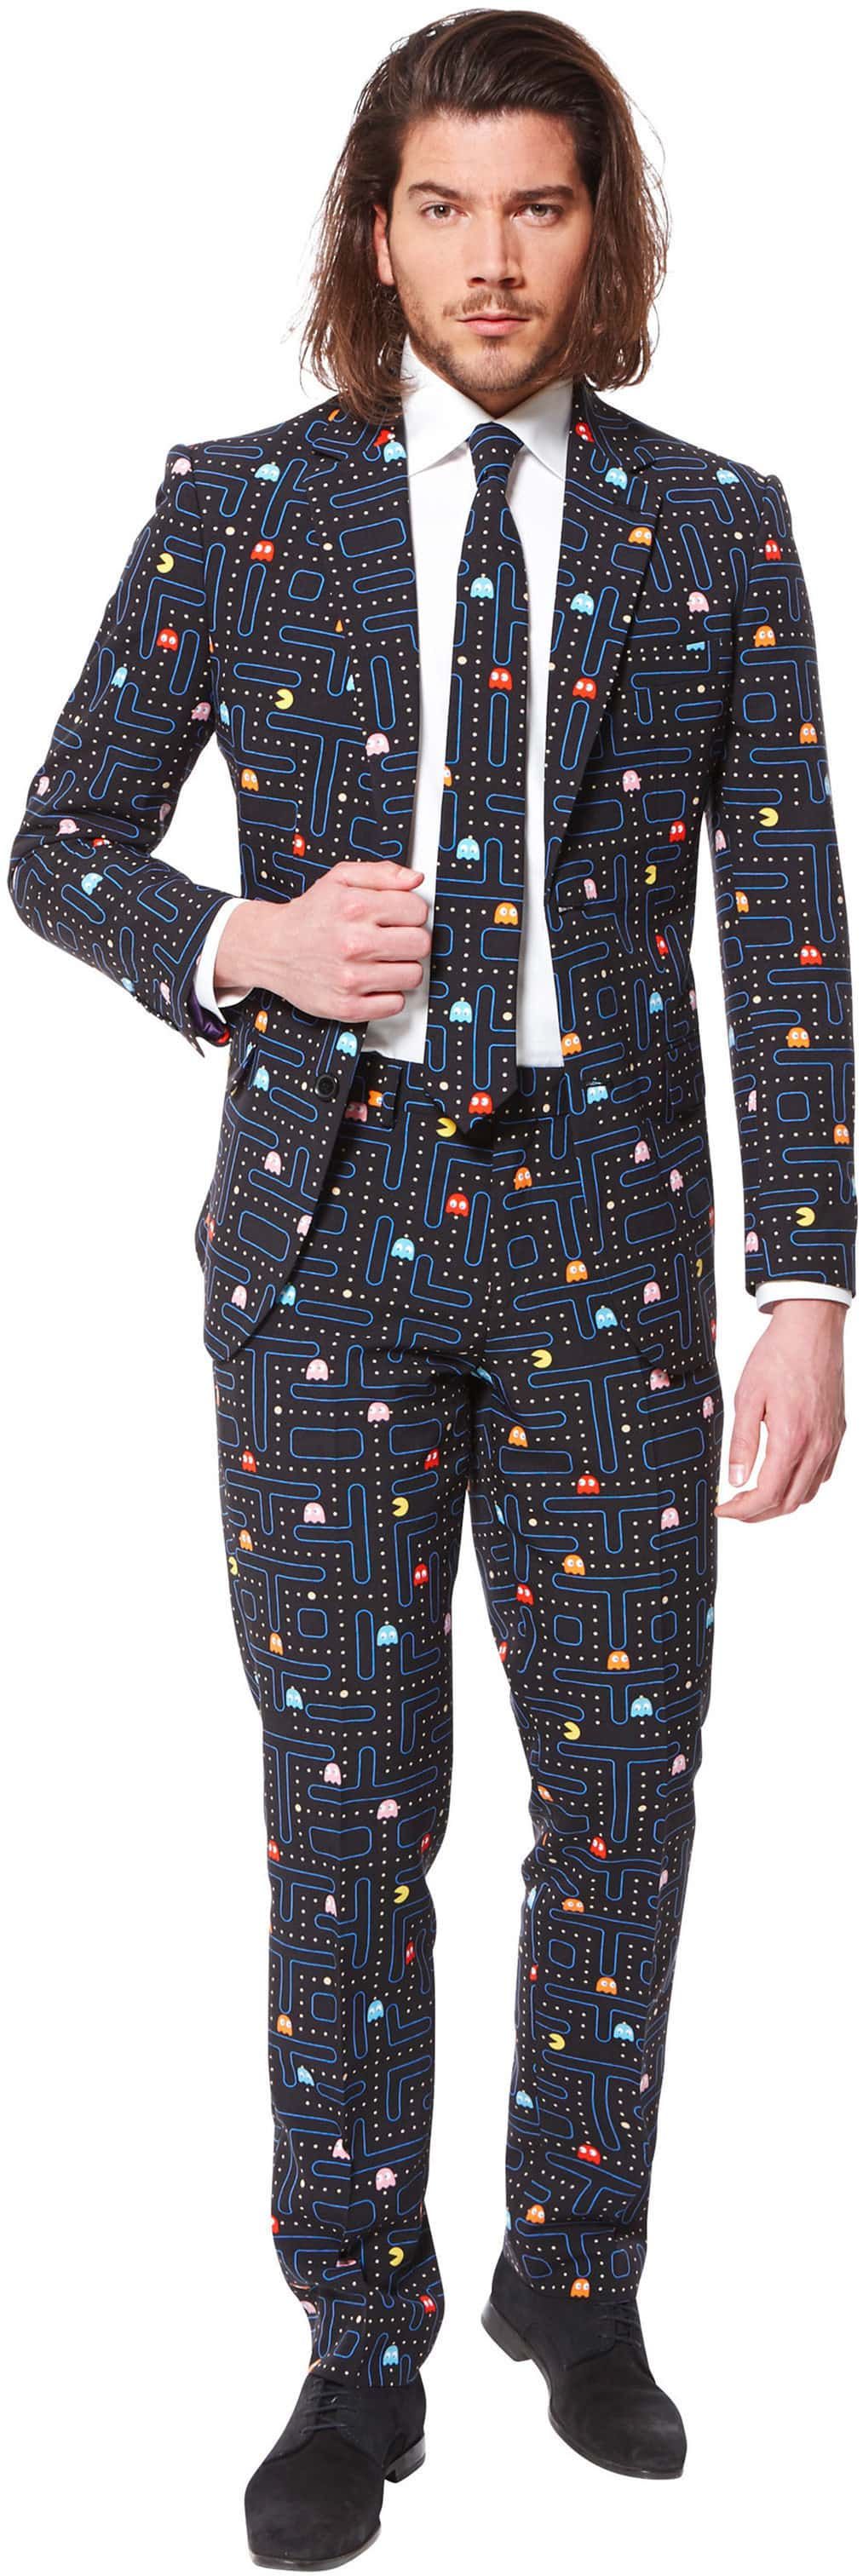 OppoSuits Costume PAC-MAN Noir taille 48